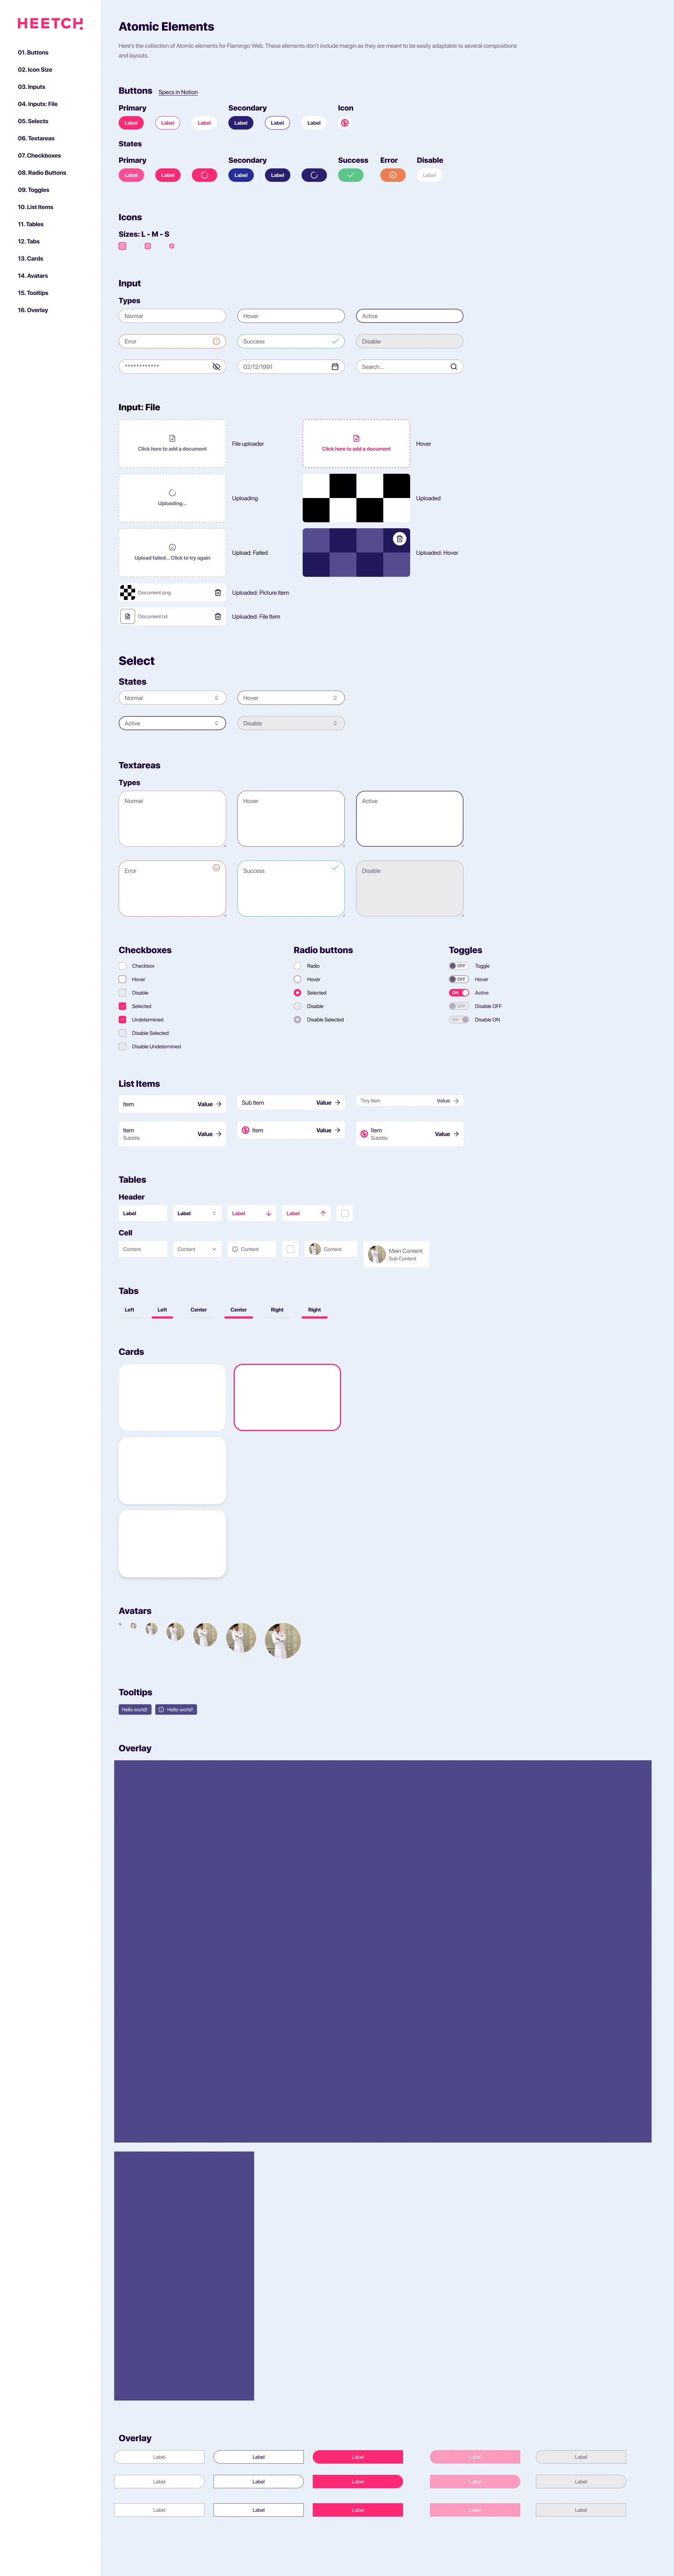 Flamingo Design System for Figma - Flamingo is a small design system that can help aspiring designers. It's based on atomic design principles.